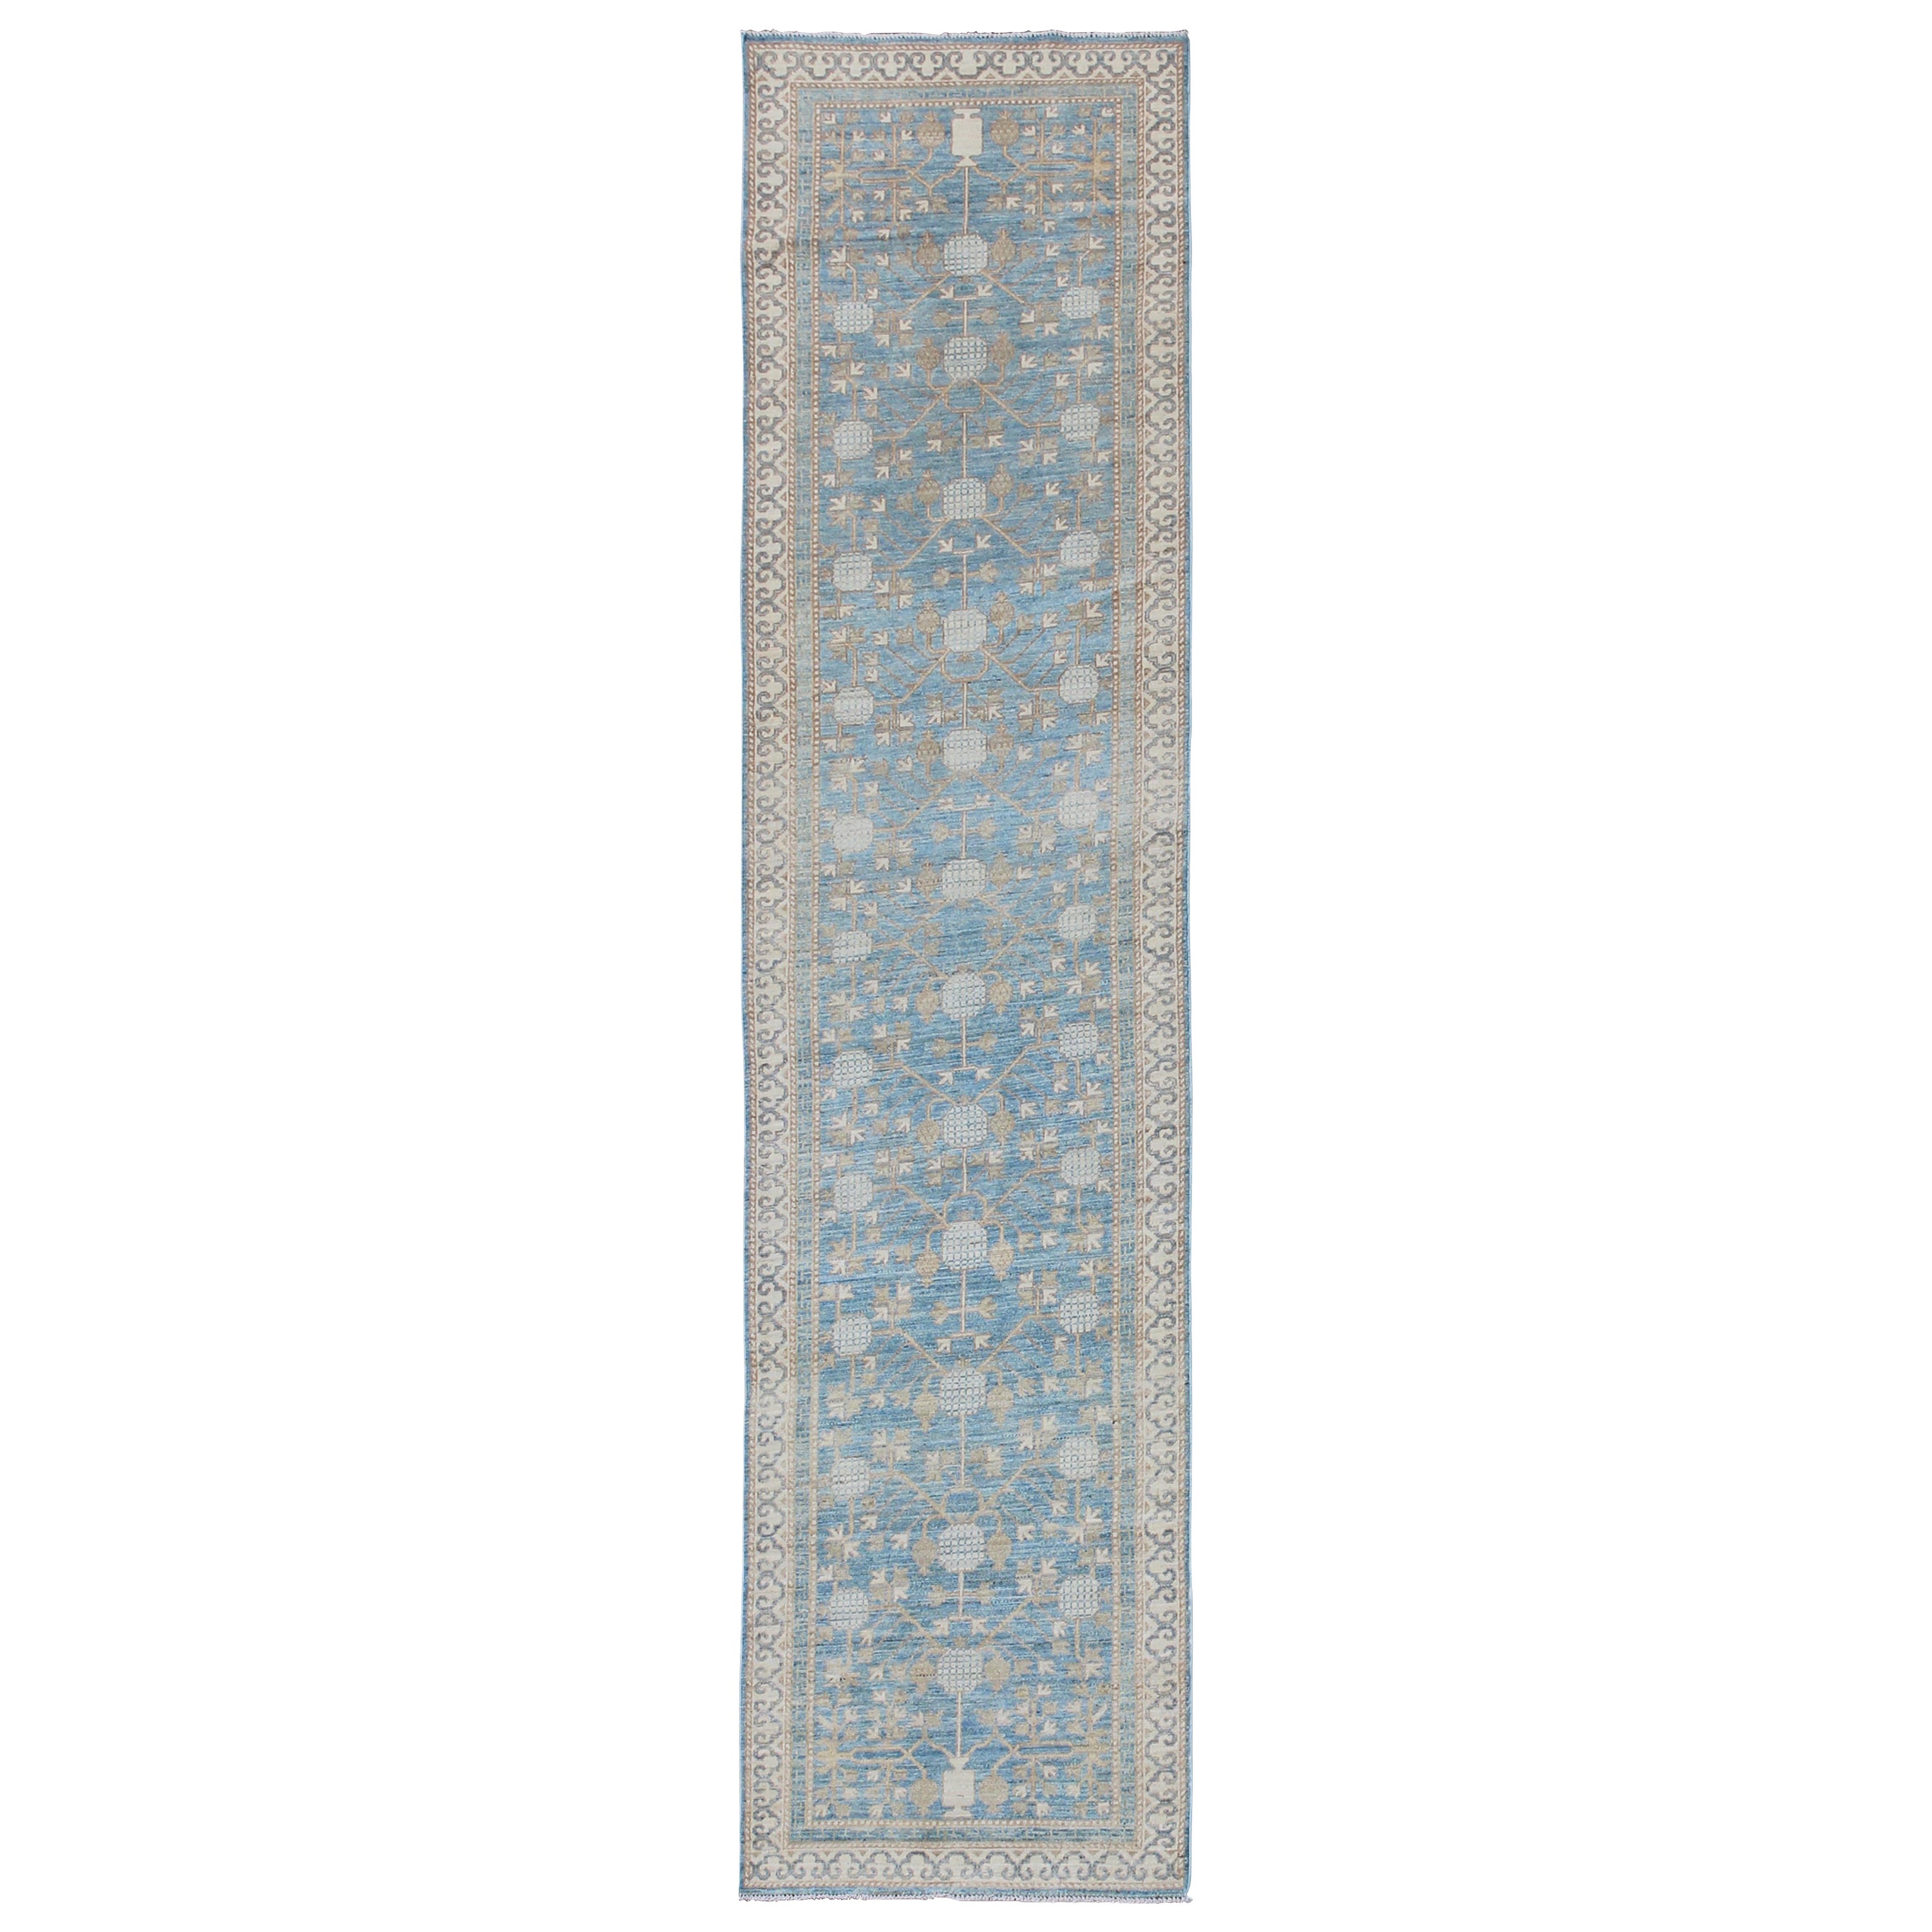 Afghan Blue and Tan Khotan Runner with All-Over Geometric-Pomegranate Pattern